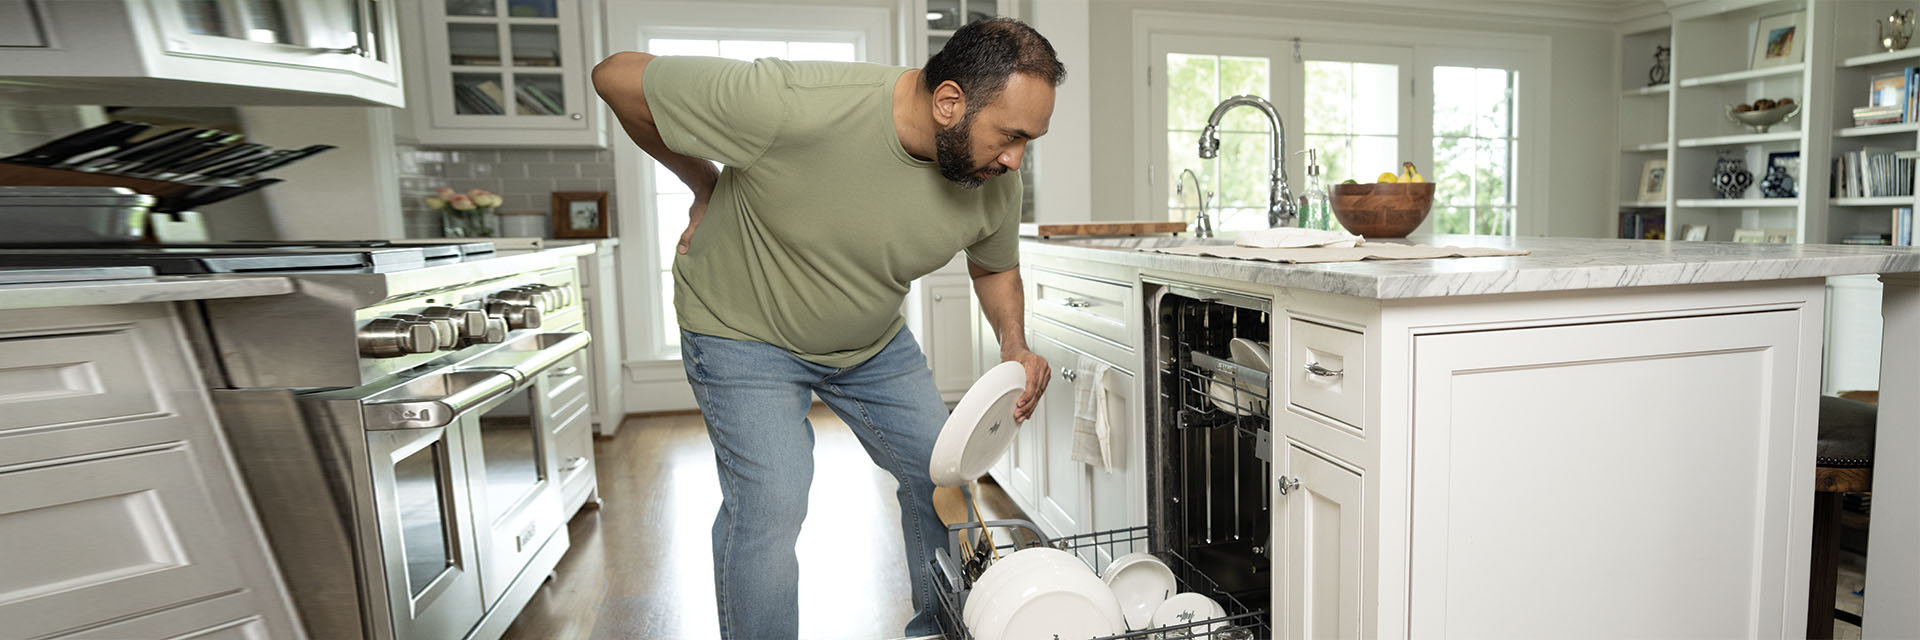 Man experiencing back pain while putting away dishes